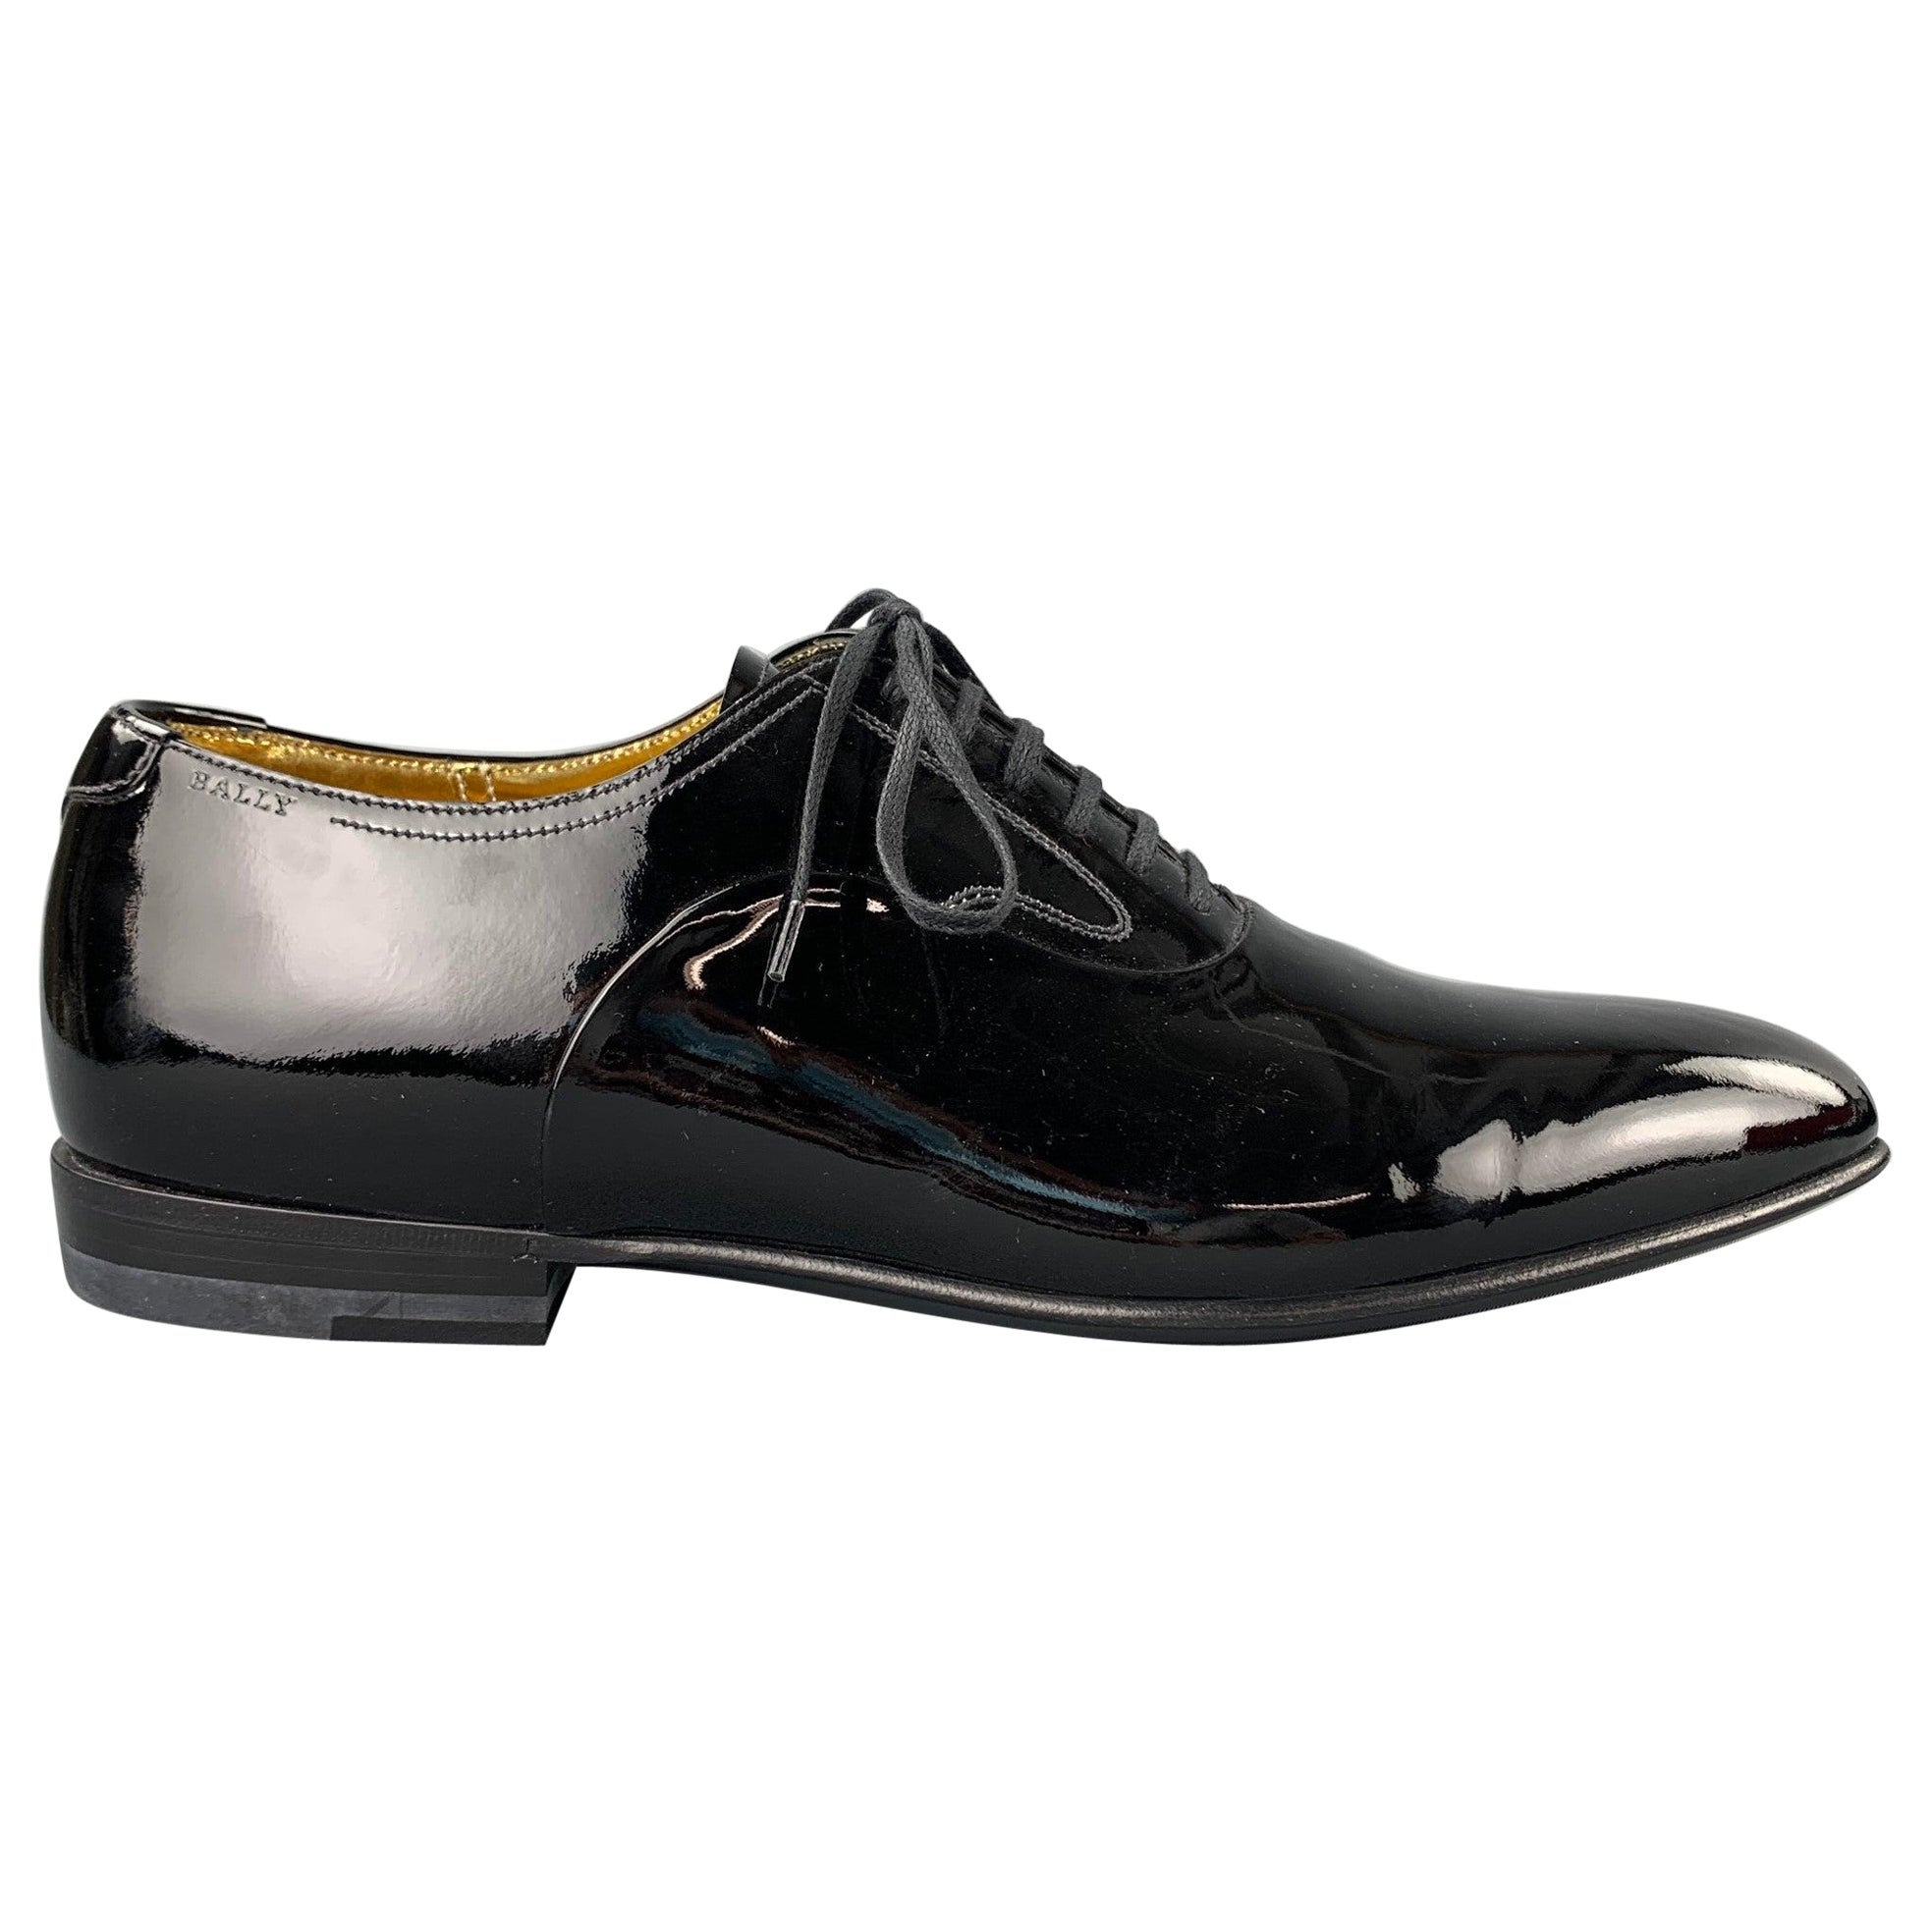 BALLY Garrett Size 8 Black Patent Leather Lace Up Shoes For Sale